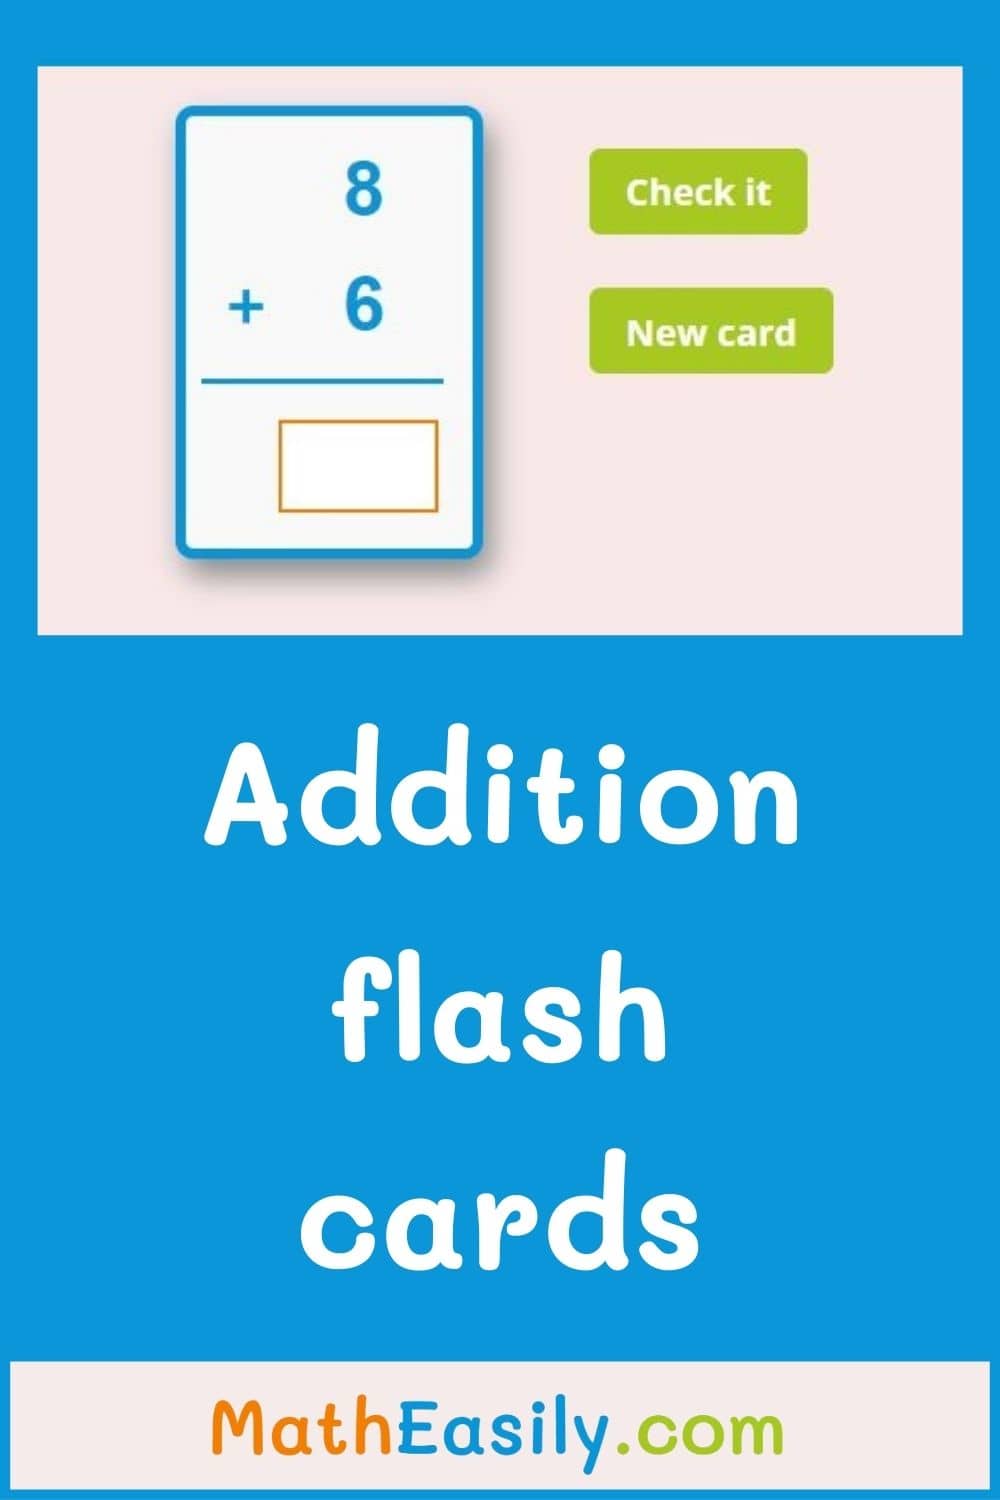 Free online addition flashcards to 20. Math addition flash cards online free. Math addition cards to 20. 
Math flash cards addition to 20.